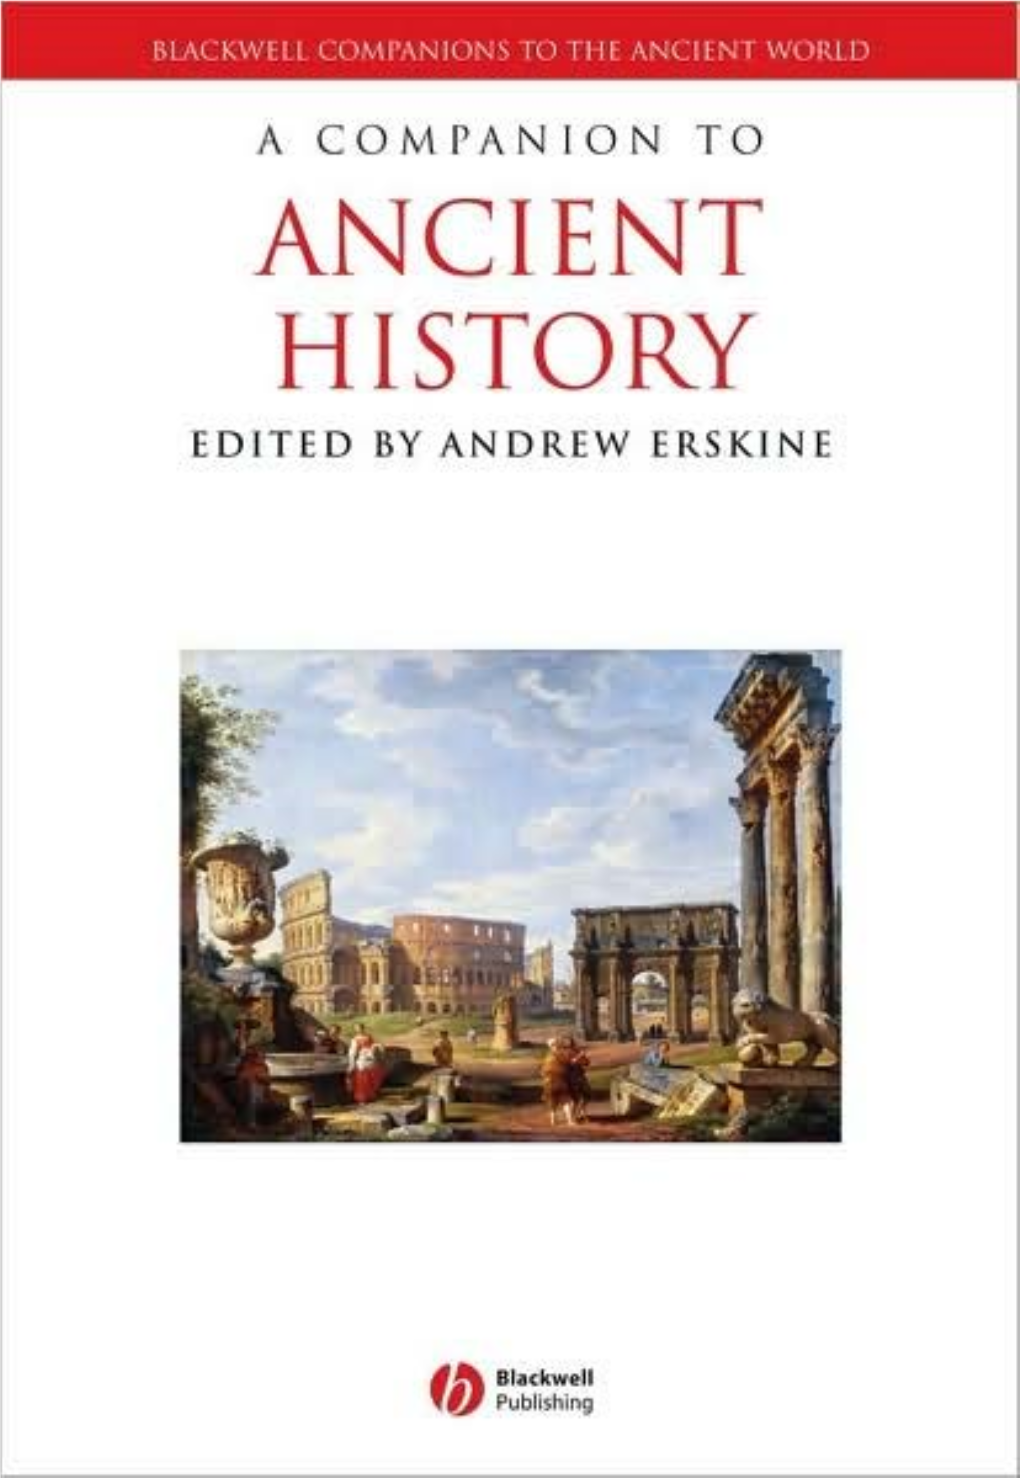 A Companion to Ancient History Edited by Andrew Erskine © 2009 Blackwell Publishing Ltd